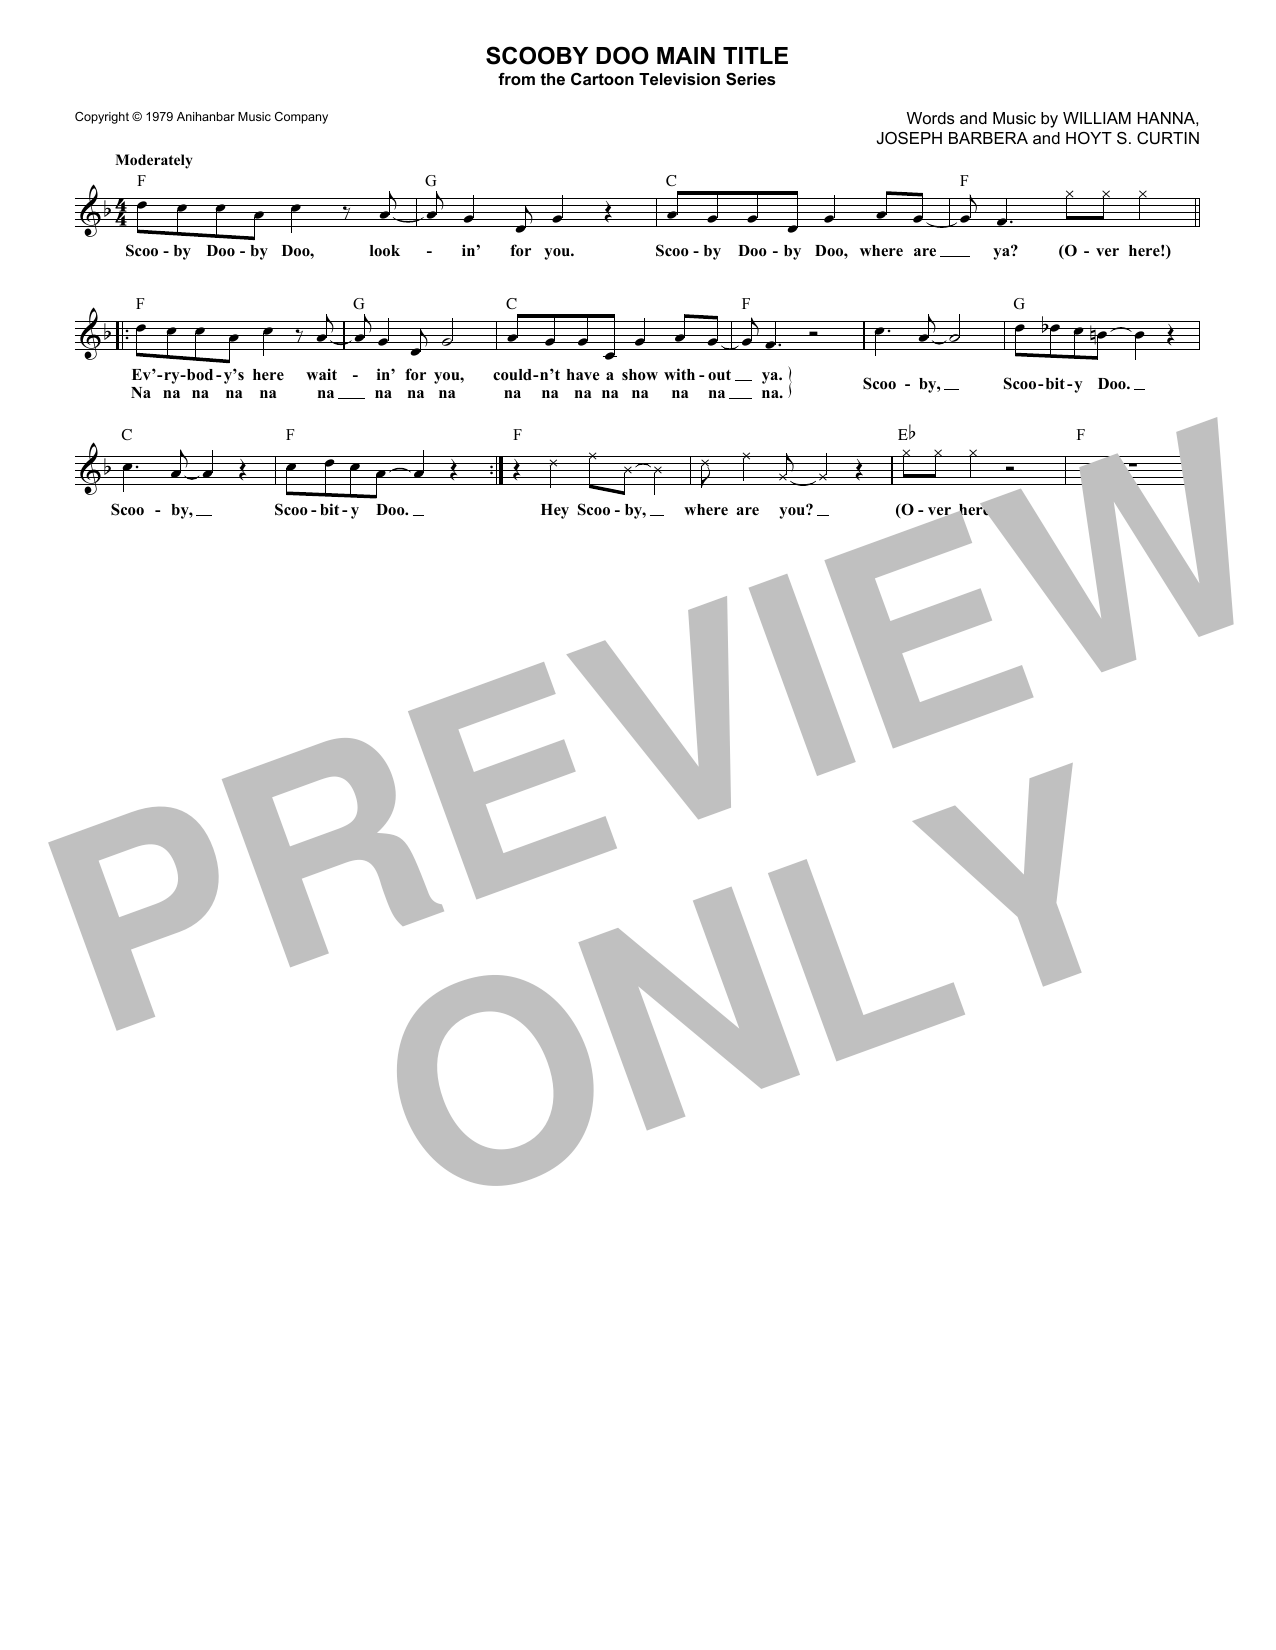 Download Hoyt Curtin Scooby Doo Main Title Sheet Music